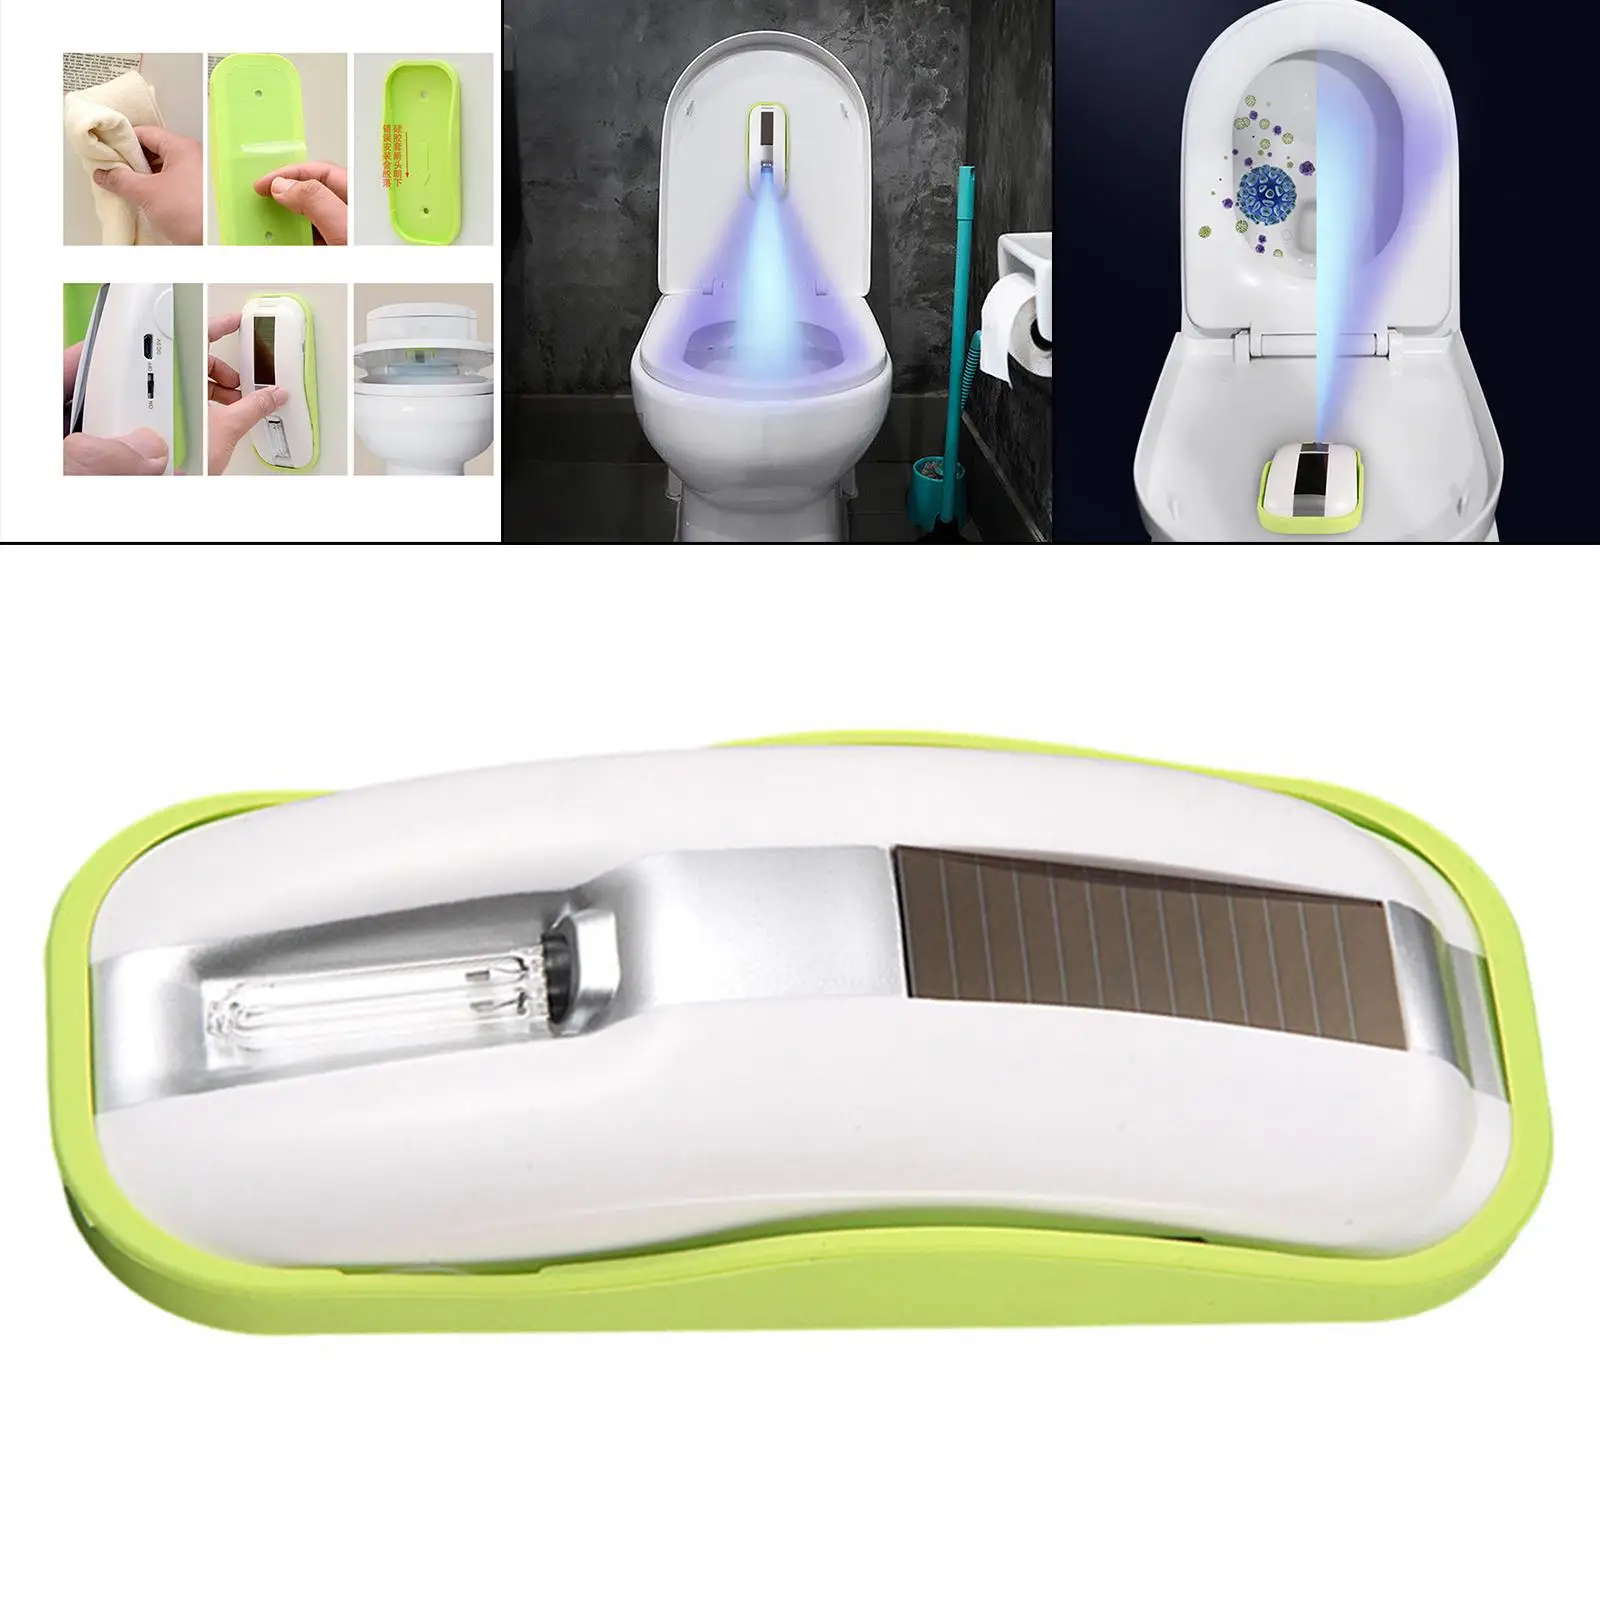 Toilet Light Sterilizer, Disinfection Light, USB Charging -C Disinfection Lamp, Ultraviolet Cleaning Gadget for Home Office